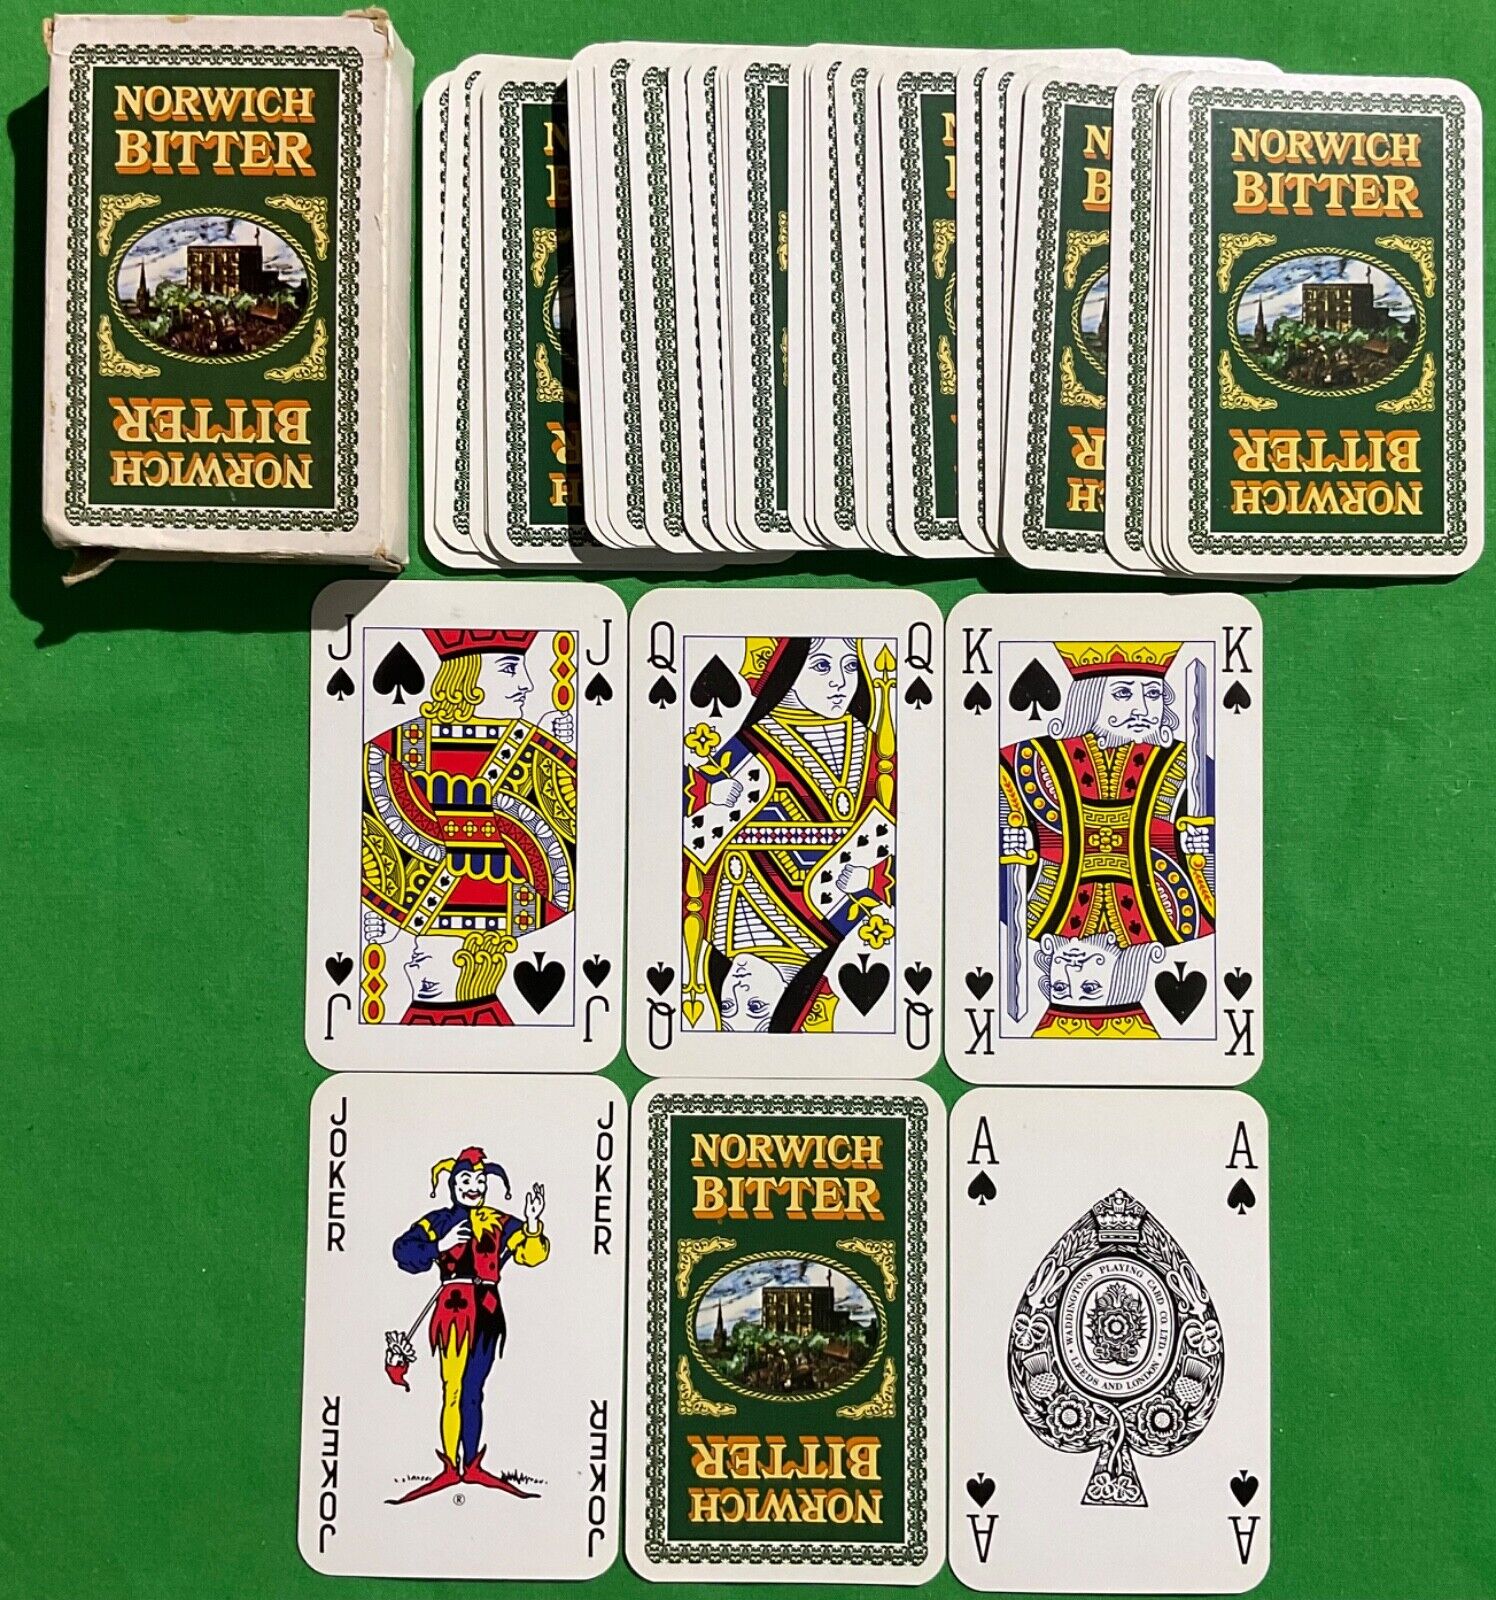 Old Vintage * NORWICH BITTER BEER * Advertising Art Pack Playing Cards BREWERY